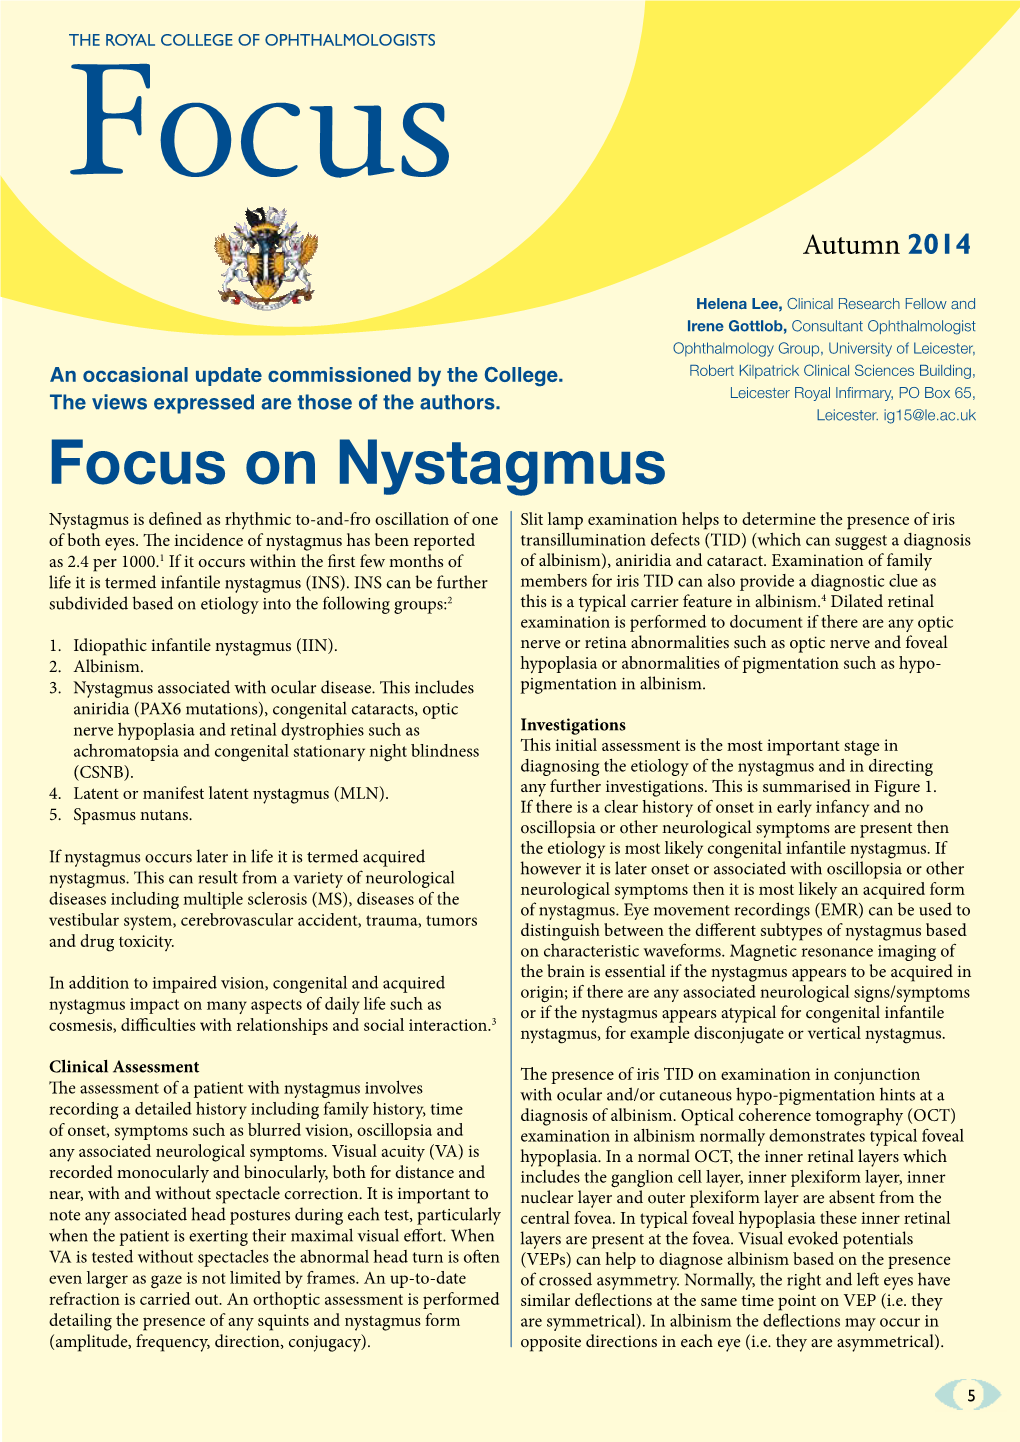 Focus on Nystagmus Nystagmus Is Defined As Rhythmic To-And-Fro Oscillation of One Slit Lamp Examination Helps to Determine the Presence of Iris of Both Eyes